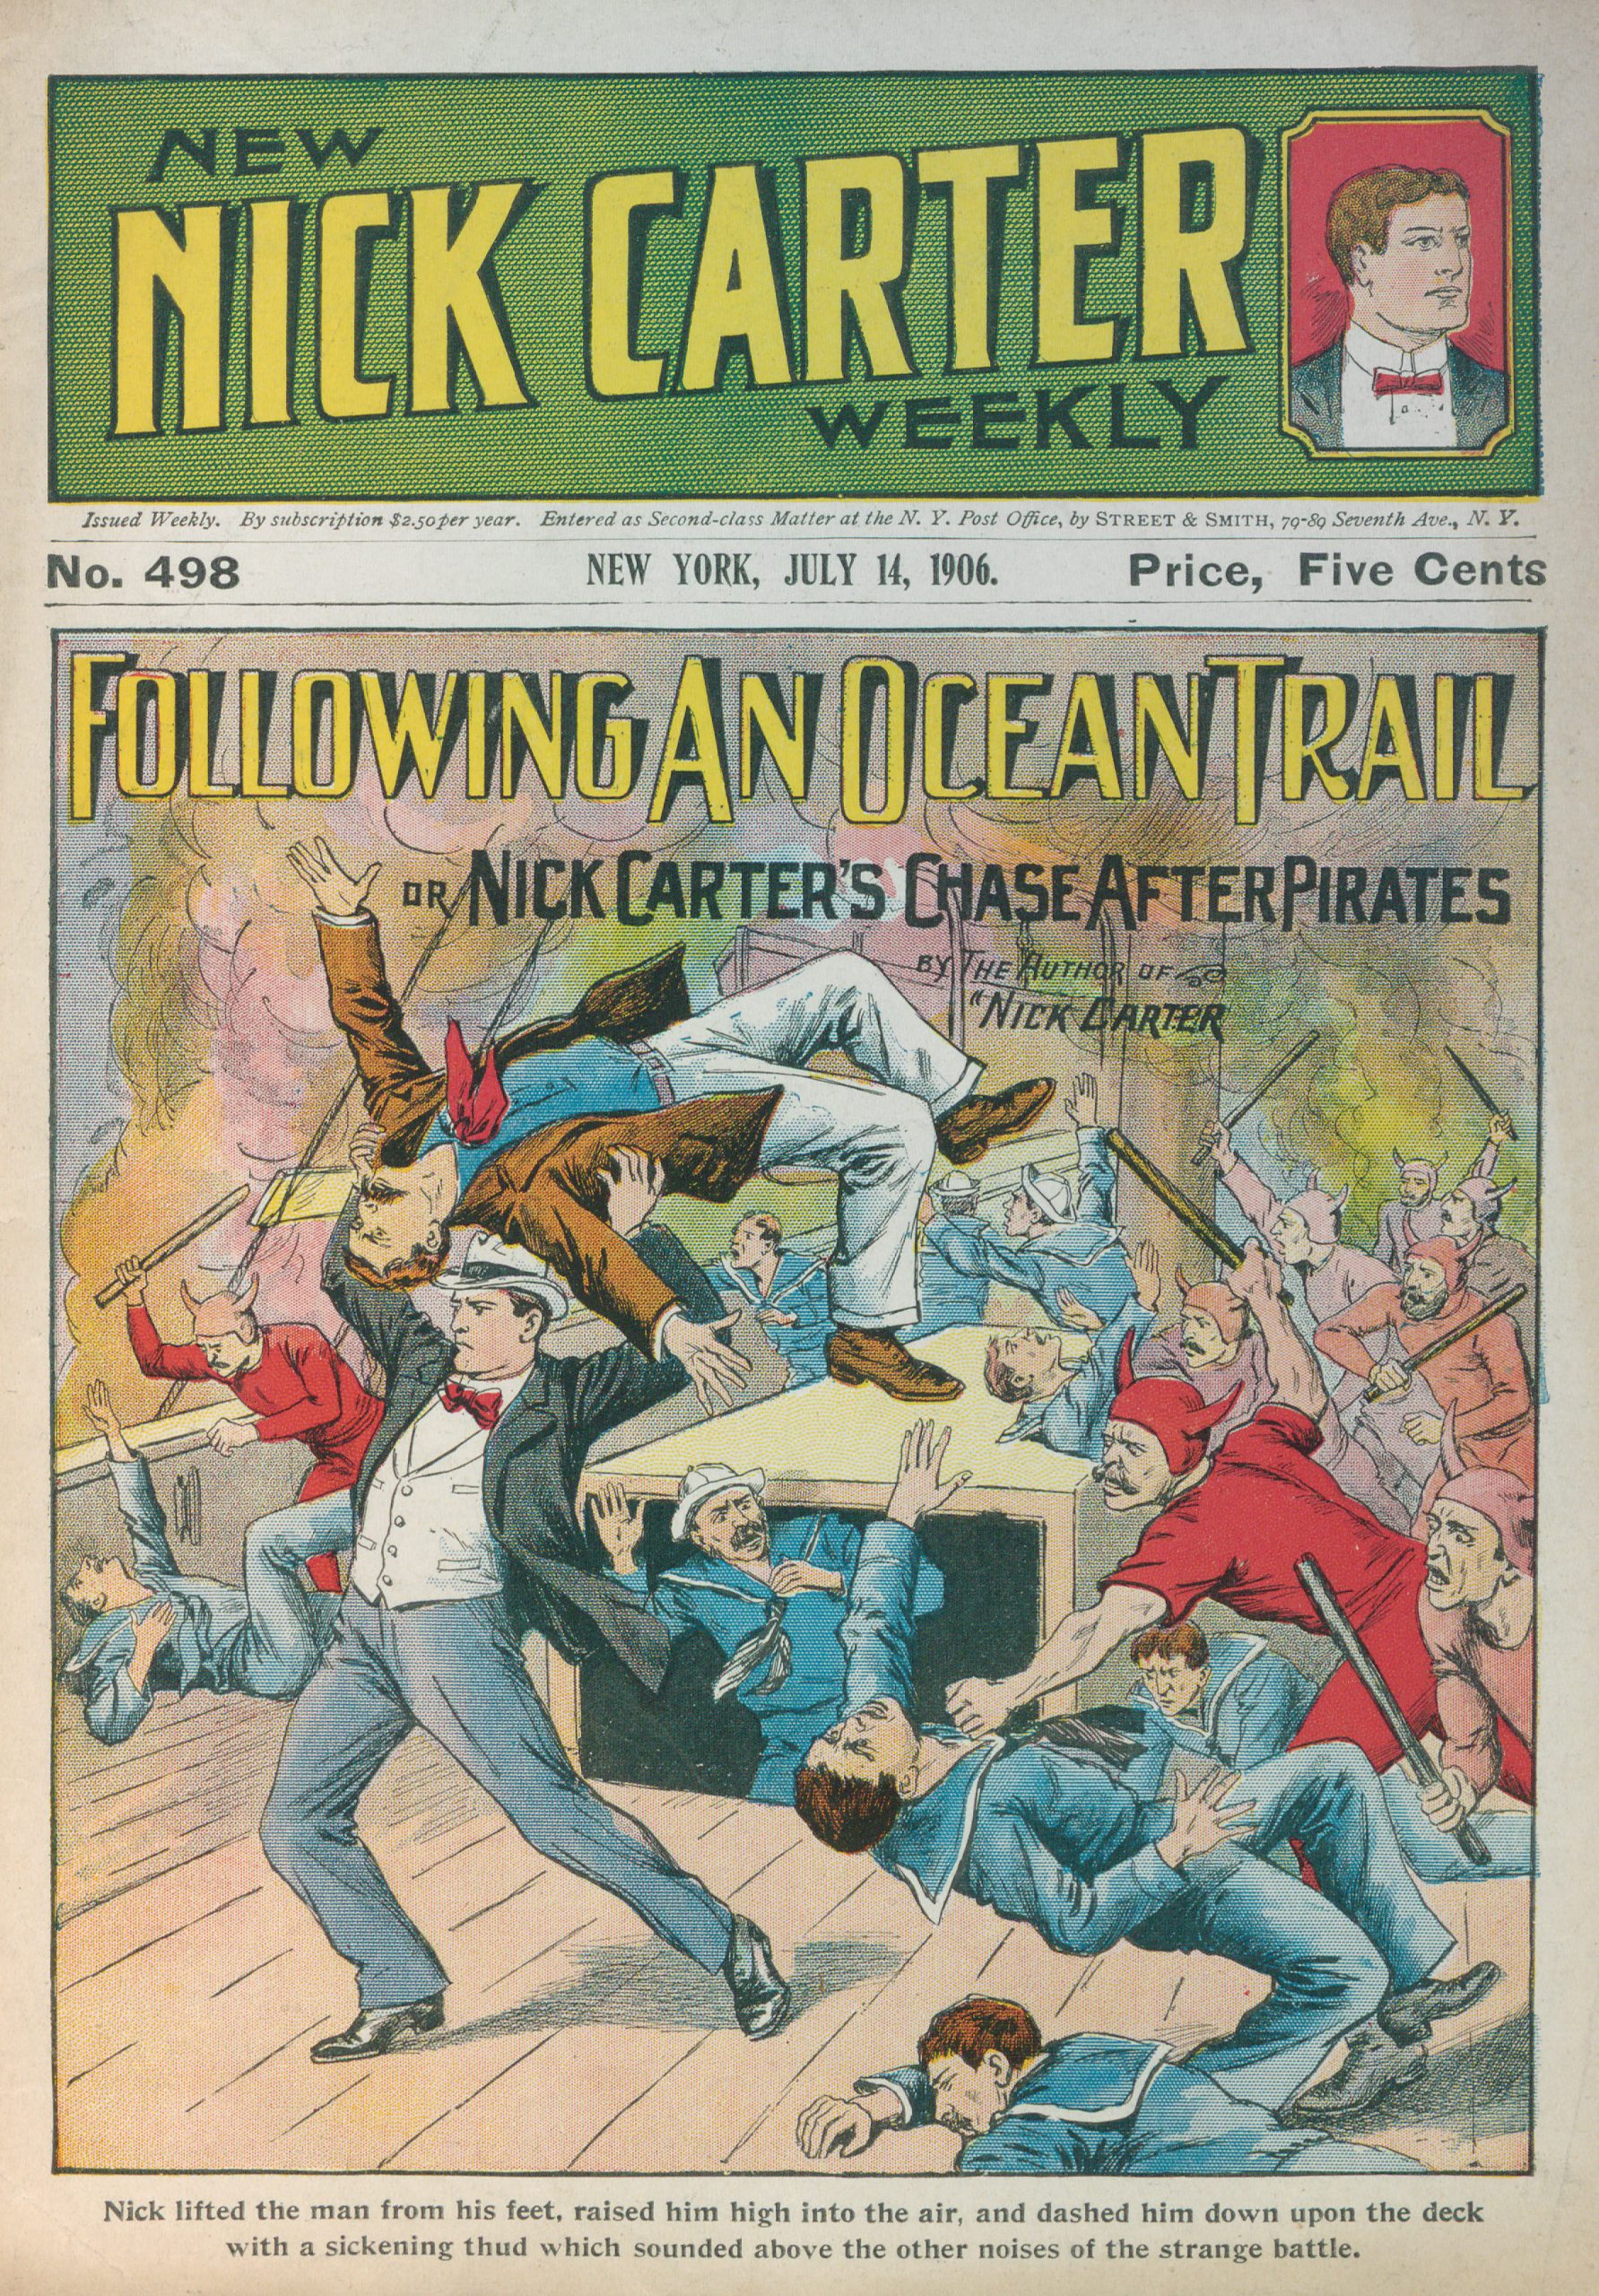 Preserving Western Pulp Fiction With Centuries of Western Dime-Novels